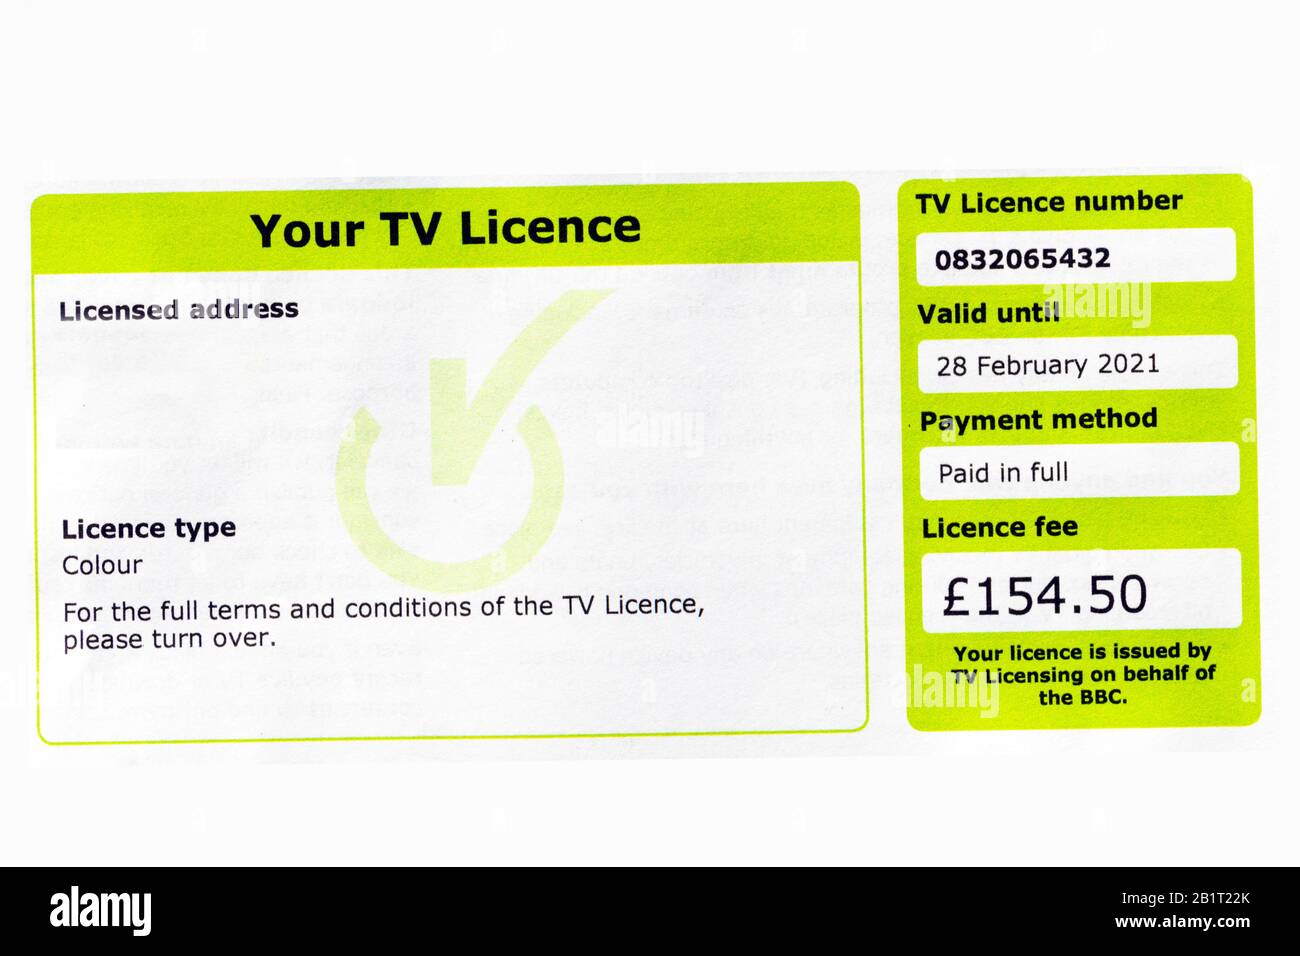 UK colour TV licence 2020. Television license Stock Photo